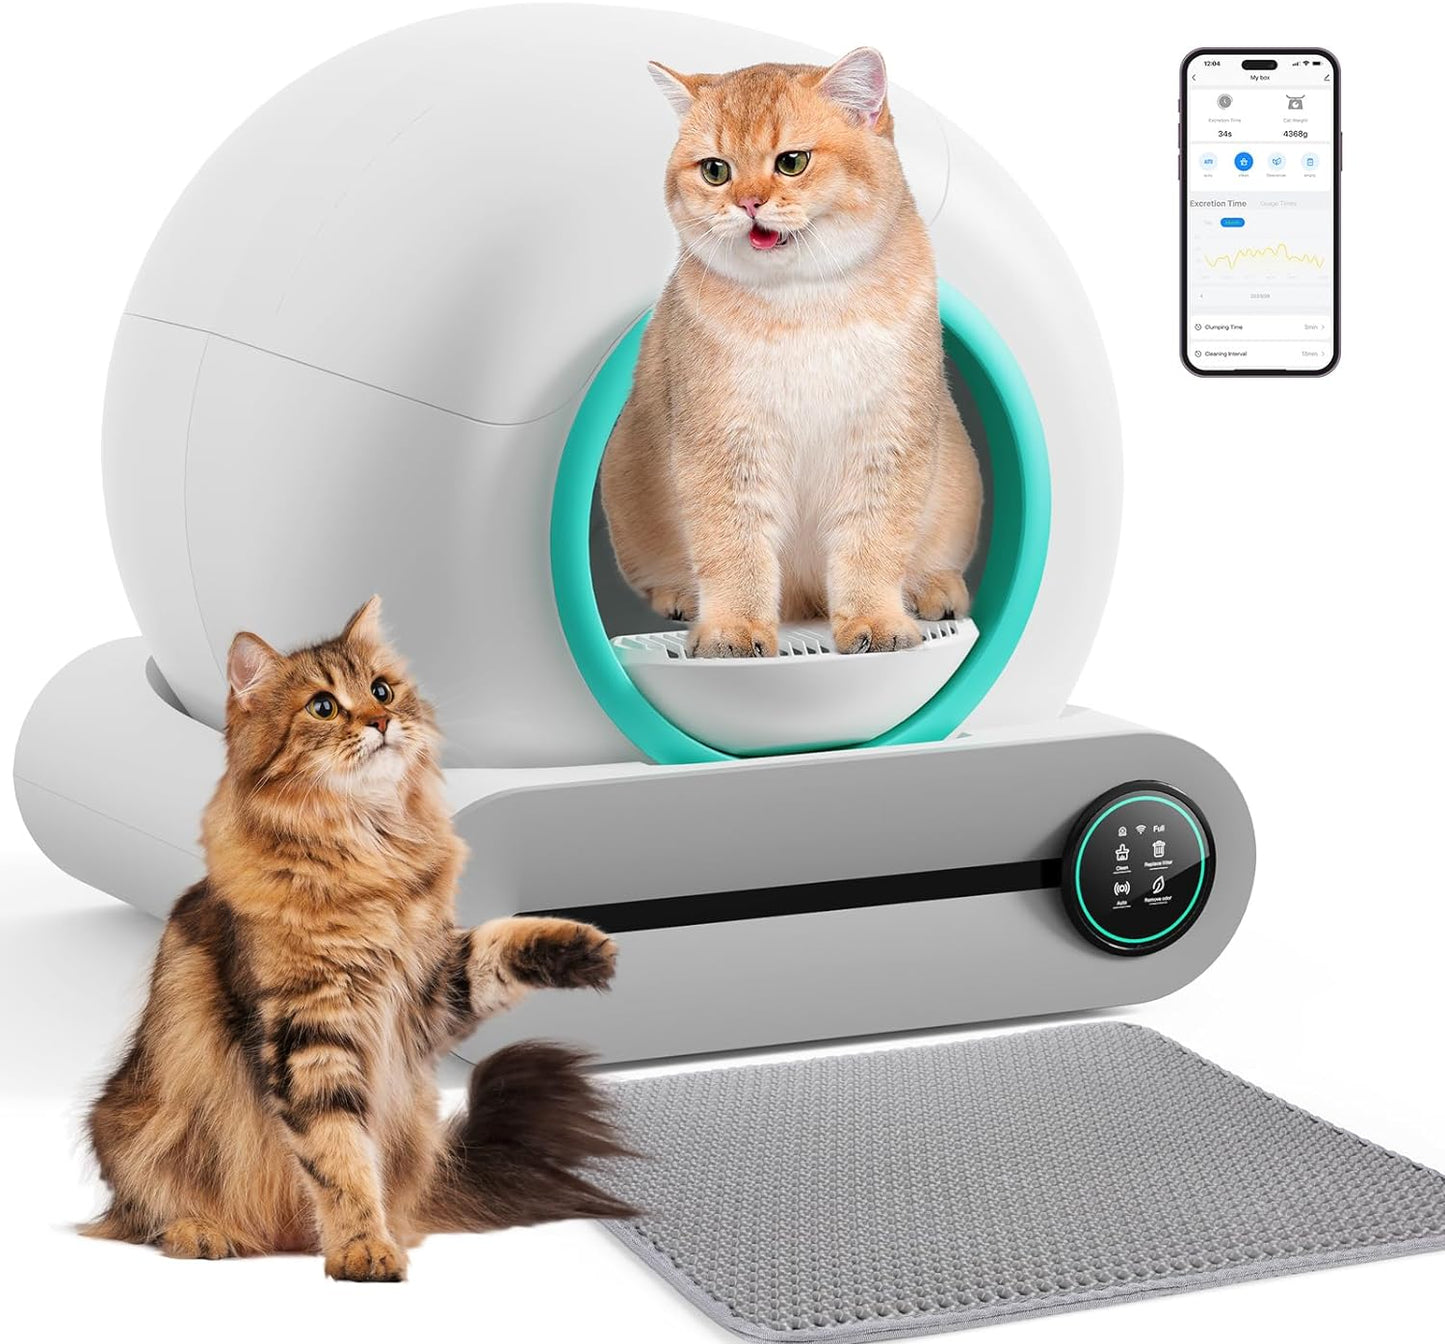 Self Cleaning Cat Litter Box, Automatic Cat Litter Box with Mat & Liners, 65L+9L Large Capacity Self Cleaning Litter Box, APP Control/Suitable for Multiple Cats【Optimized Version】